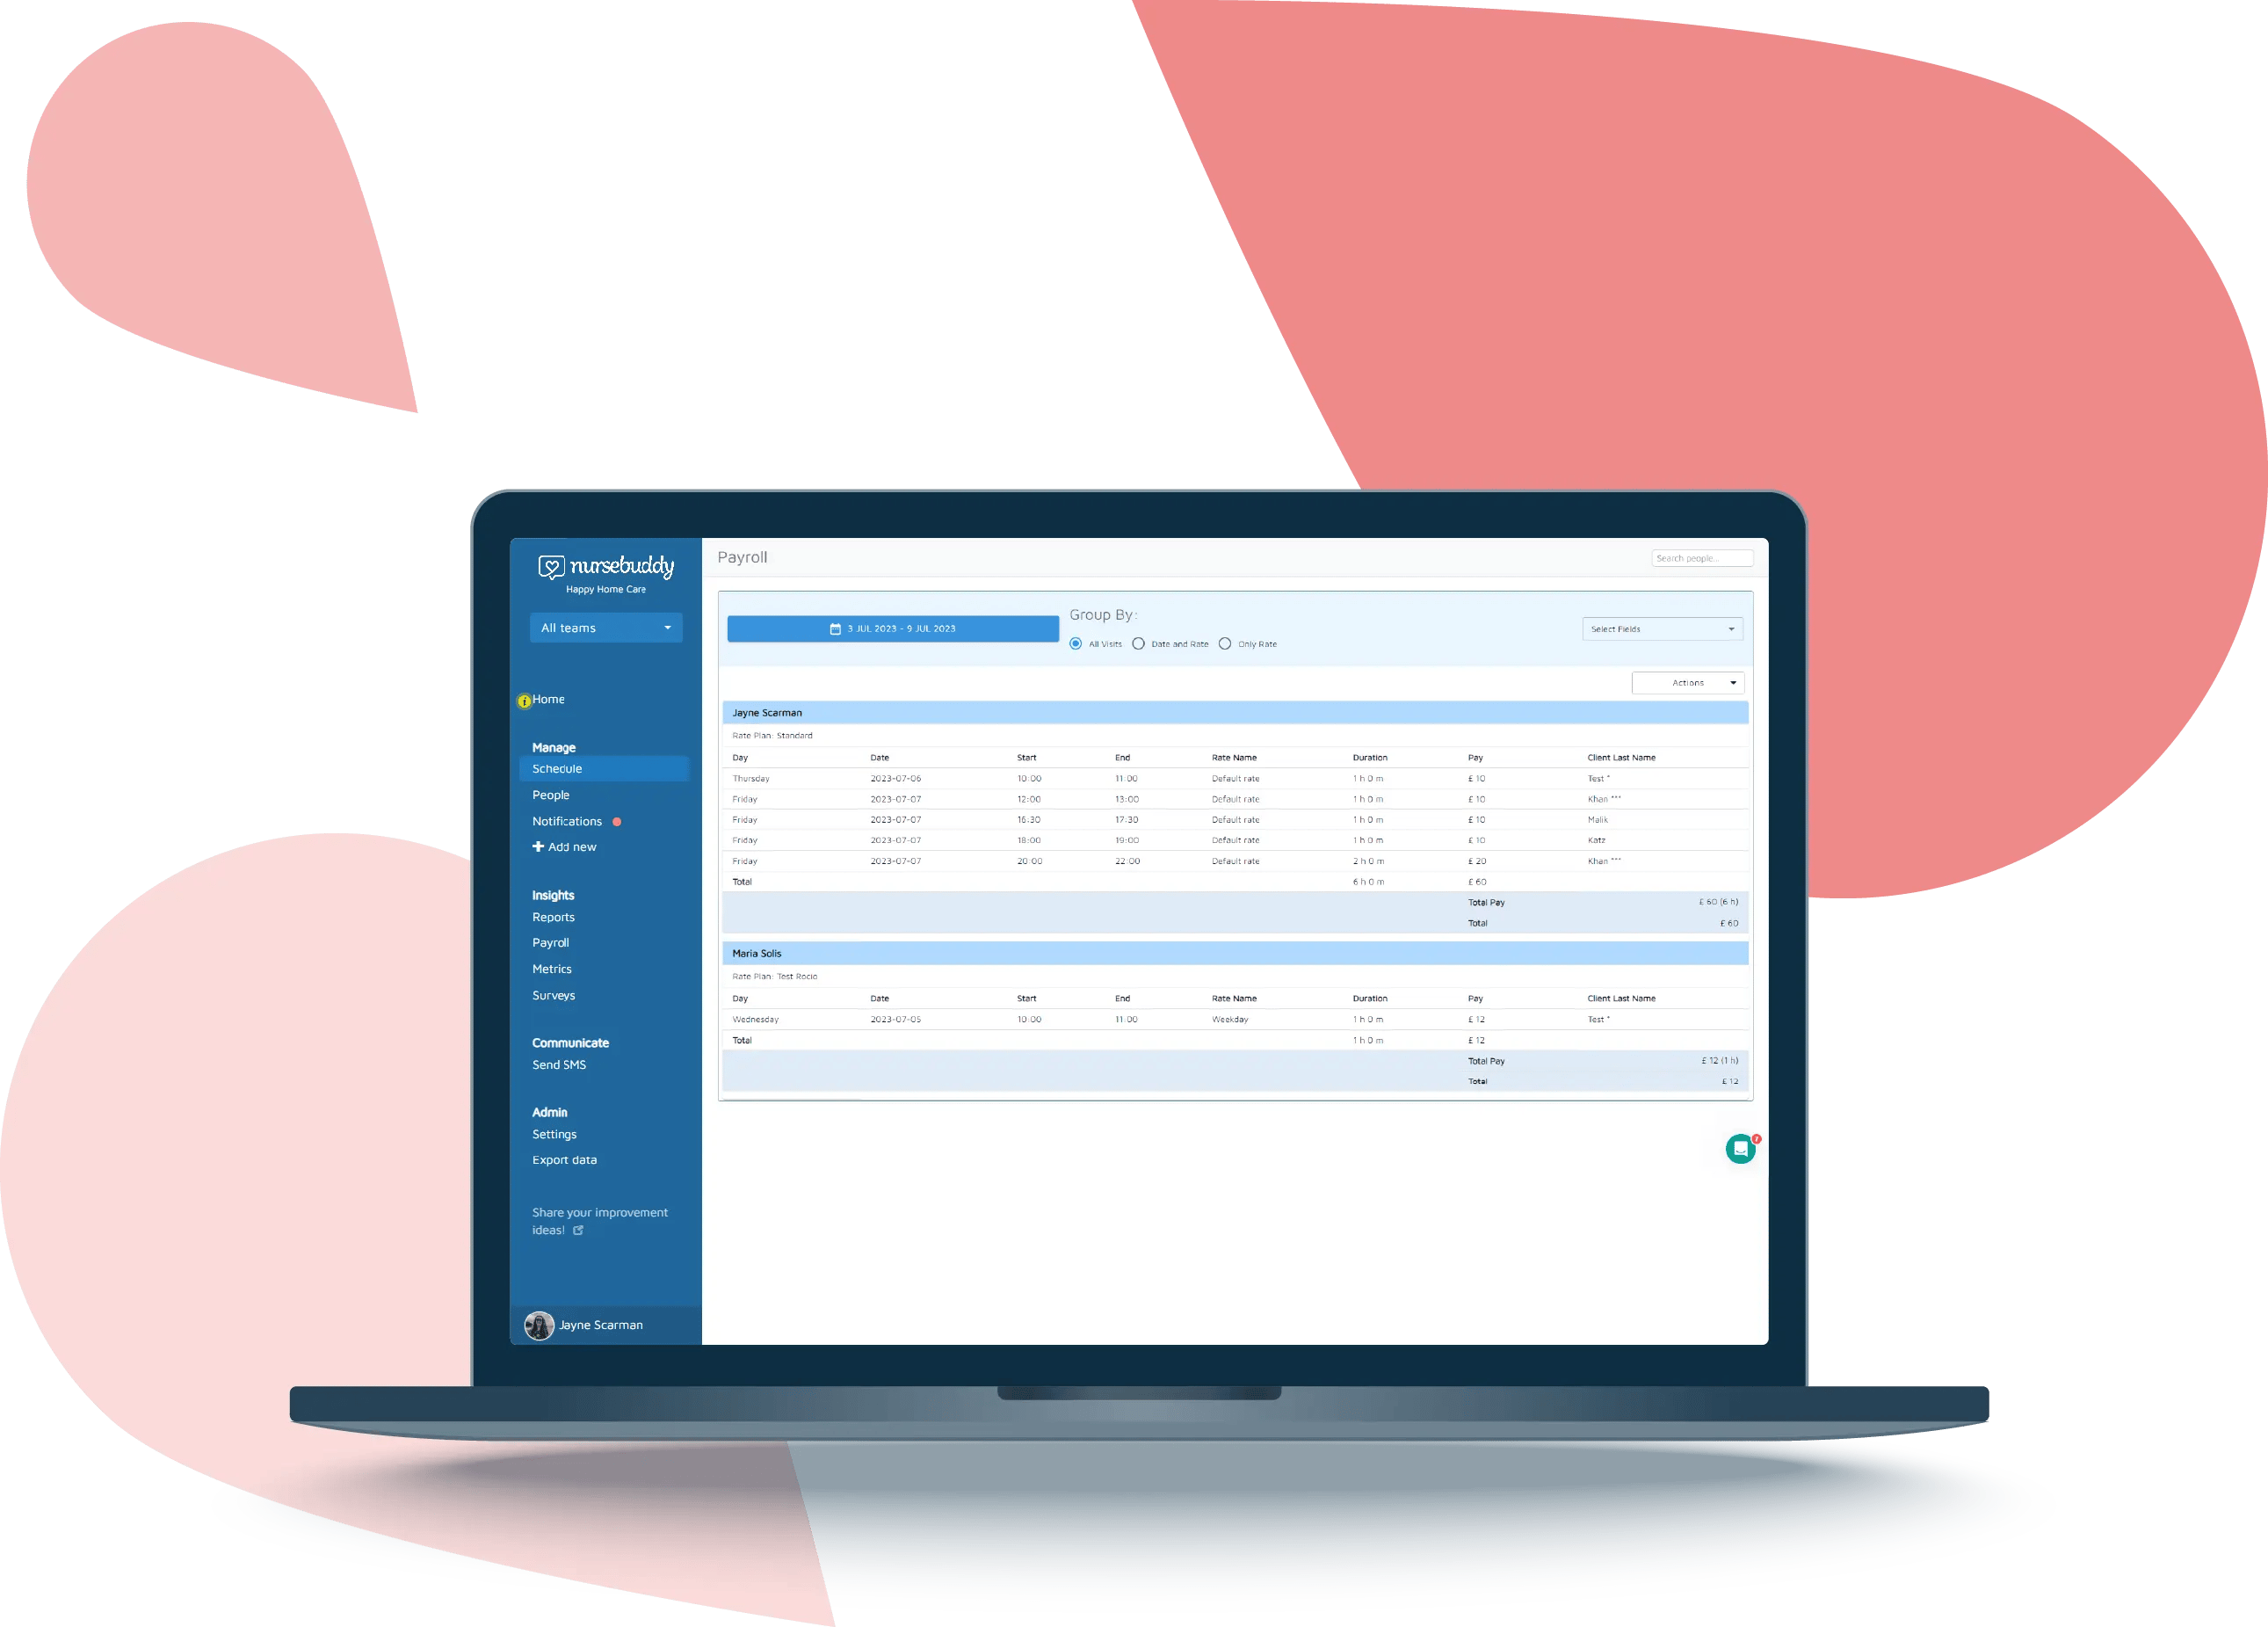 A payroll report in Nursebuddy, displayed on a laptop